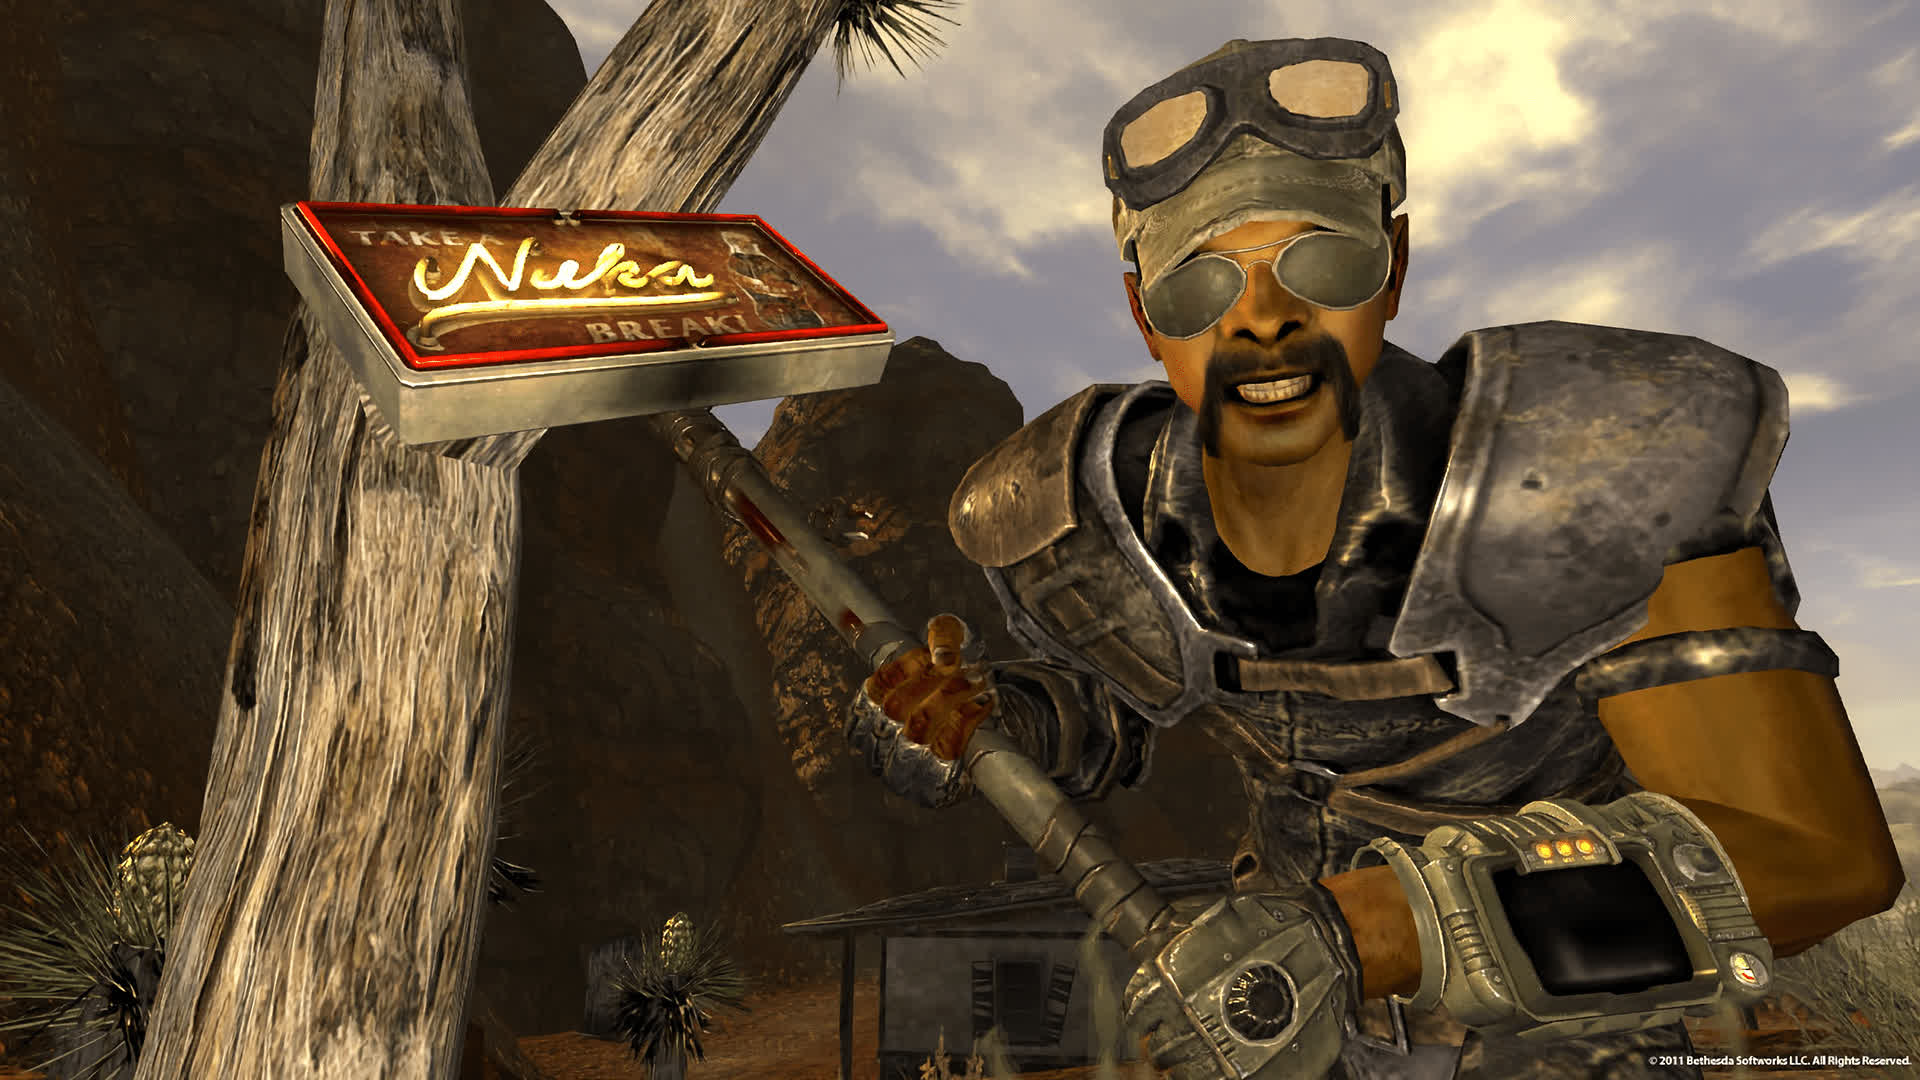 Fallout: New Vegas is free on the Epic Games Store until June 1